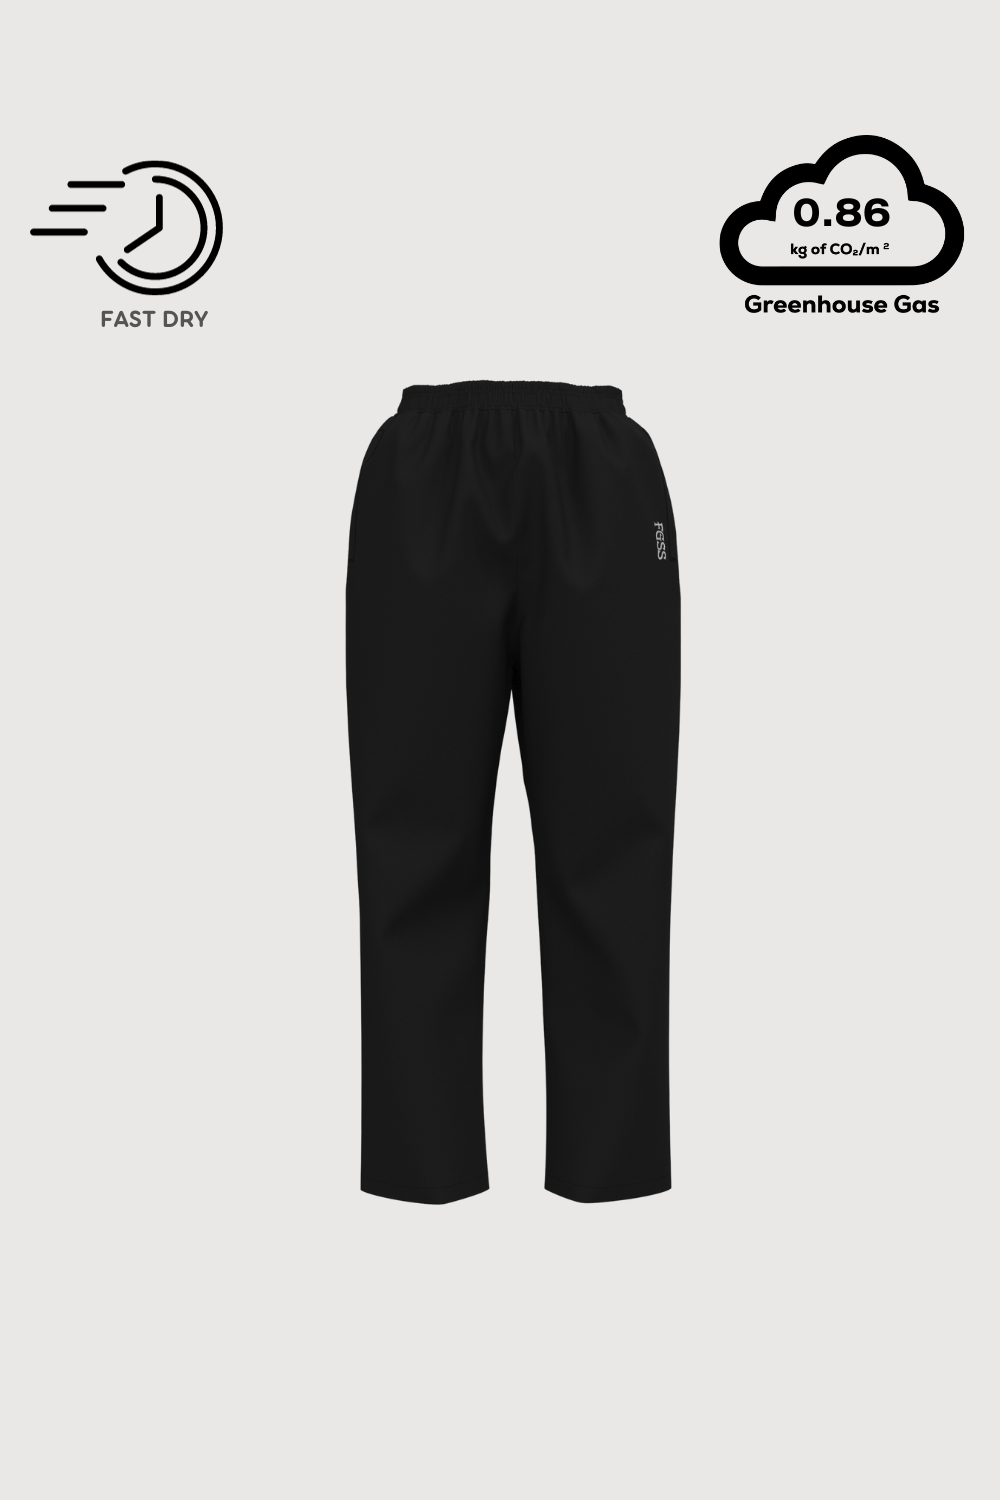 <b>POHTYH</b> AW Kid's Track Pants (CPS0010)